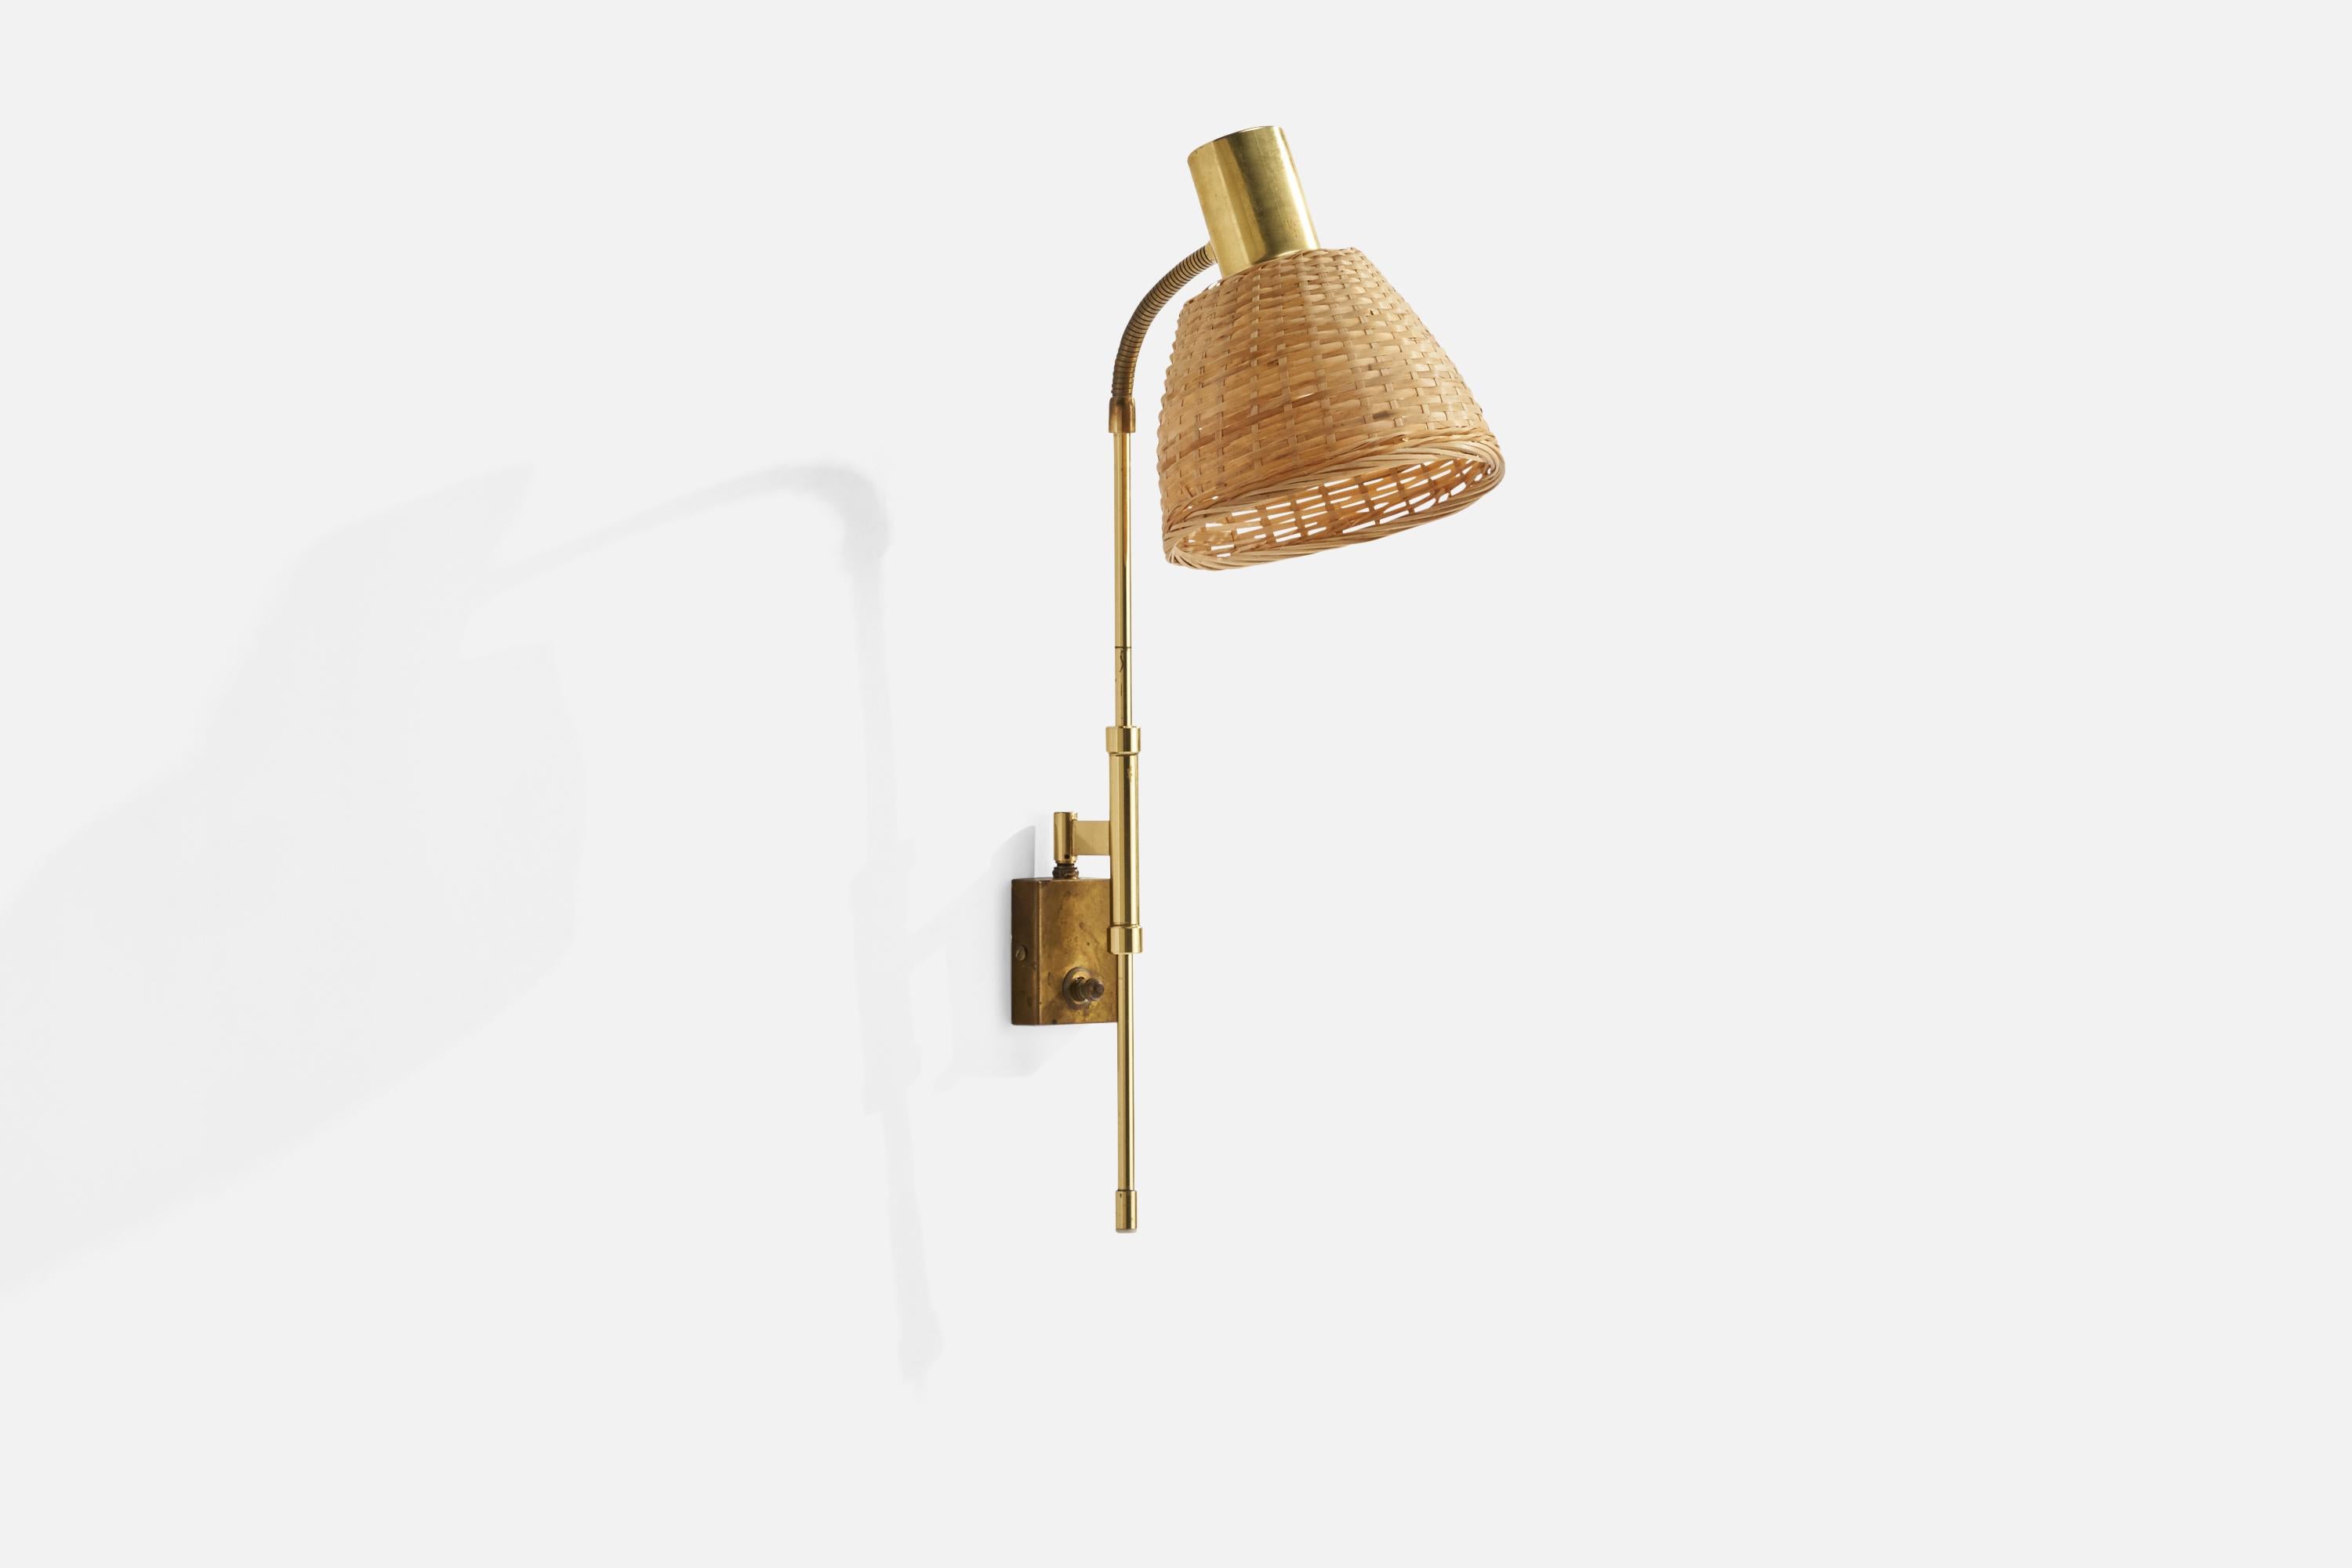 An adjustable brass and rattan wall light designed and produced in Sweden, c. 1970s.

Overall Dimensions (inches): 24” H x 12” W x 8”  D
Back Plate Dimensions (inches): 3” H x 2.25” W x .75”  D
Bulb Specifications: E-26 Bulb
Number of Sockets: 1
All